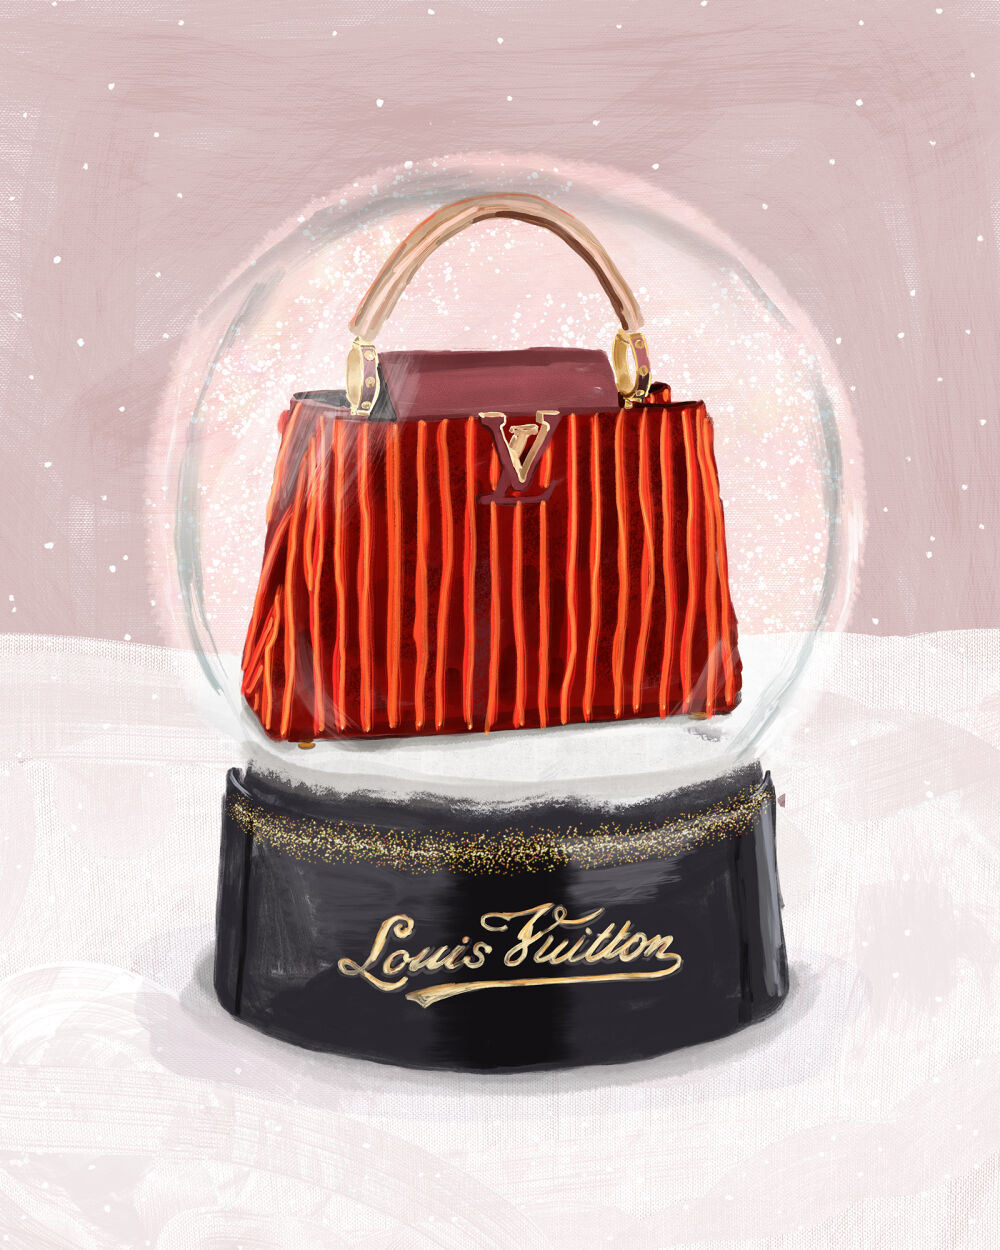 Illustrated Christmas Gift advertising campaign for Harper´s Bazaar, by Christina Gliha